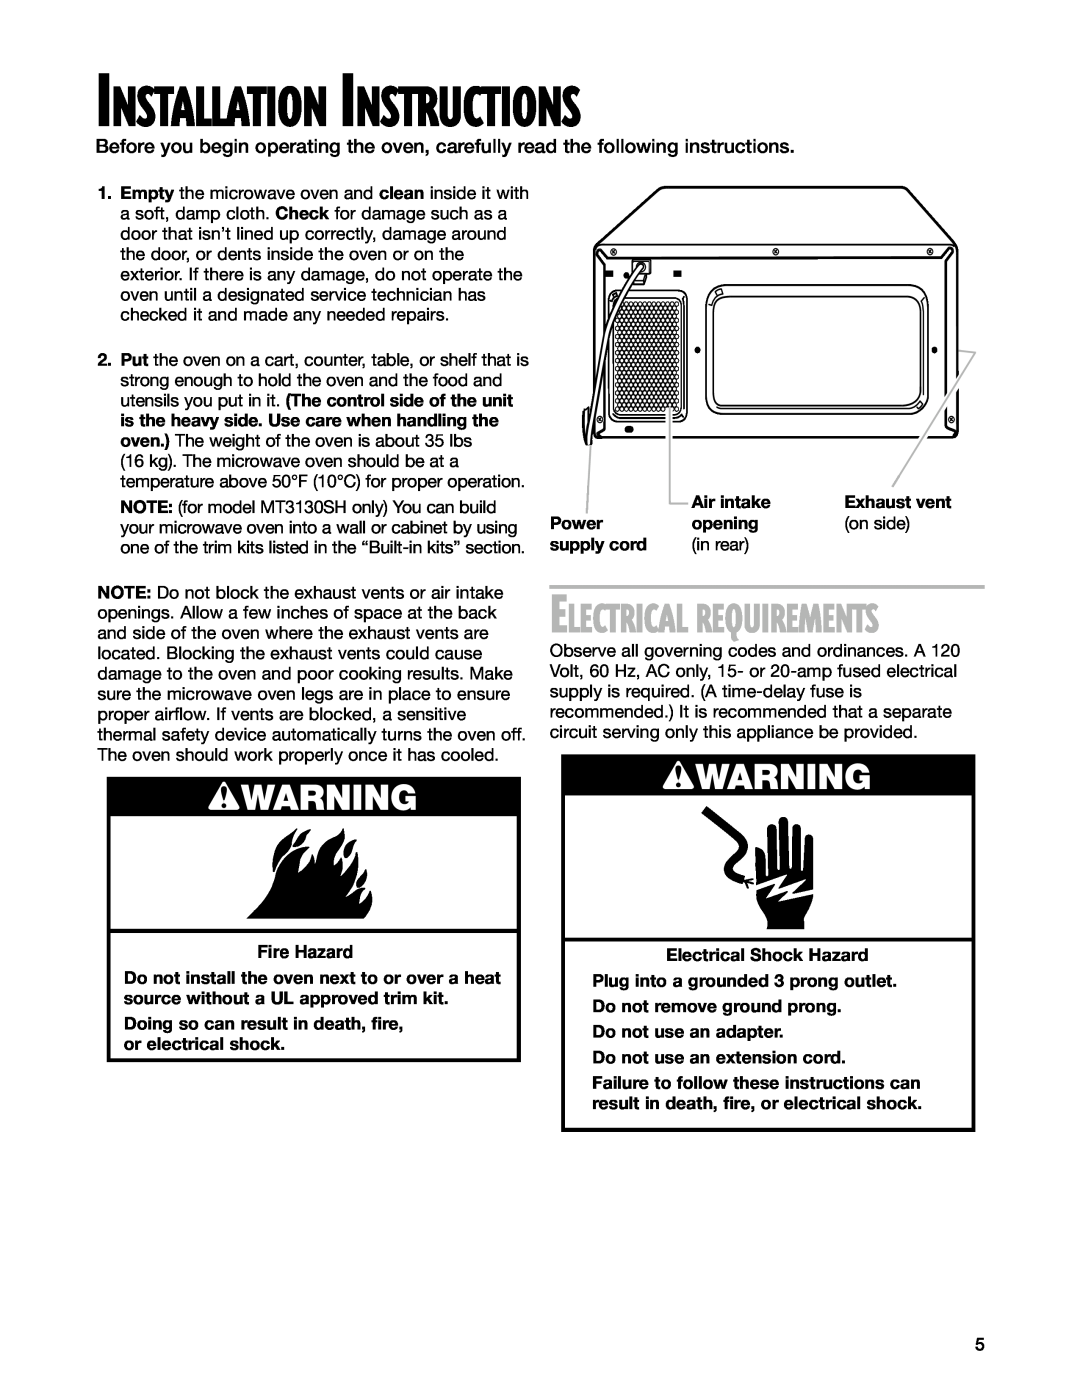 Whirlpool MT3130SH, MT3100SH wWARNING, Electrical Requirements, Fire Hazard, Installation Instructions 